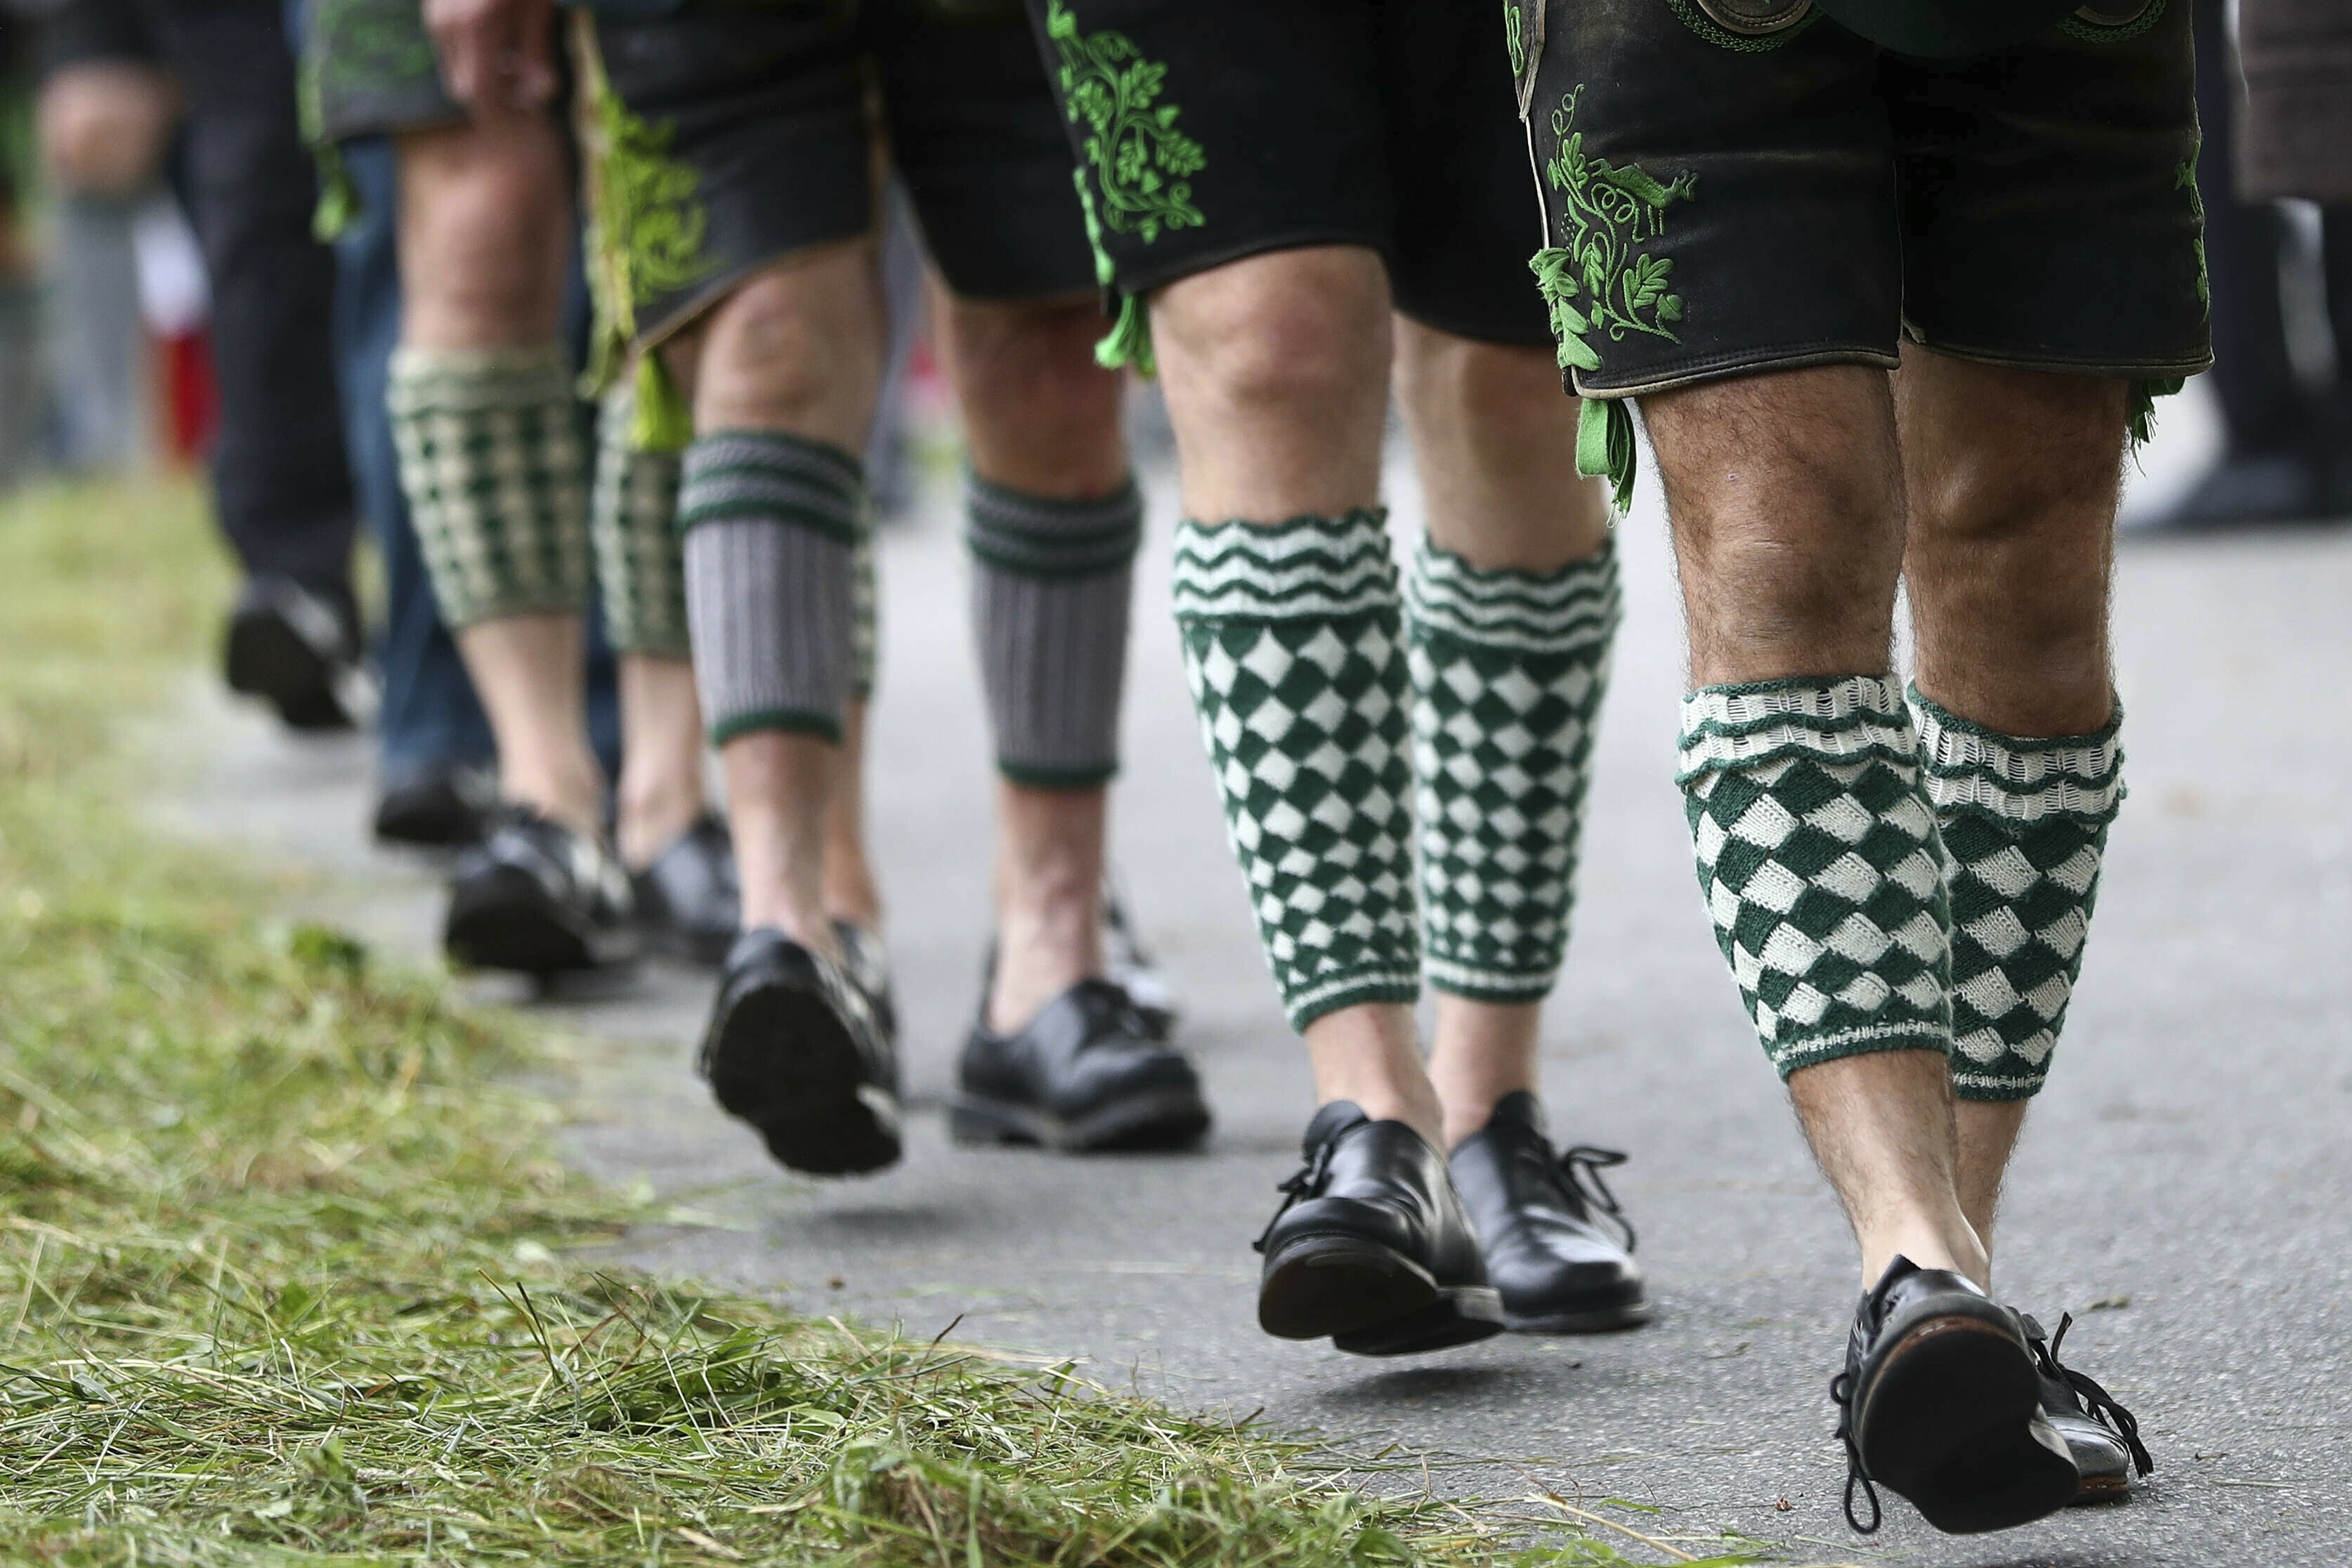 Men dressed in traditional clothes start for a Corpus Christi procession at lake Staffelsee in Seehausen near Murnau, Germany, Thursday, June 20, 2019. (AP Photo/Matthias Schrader)